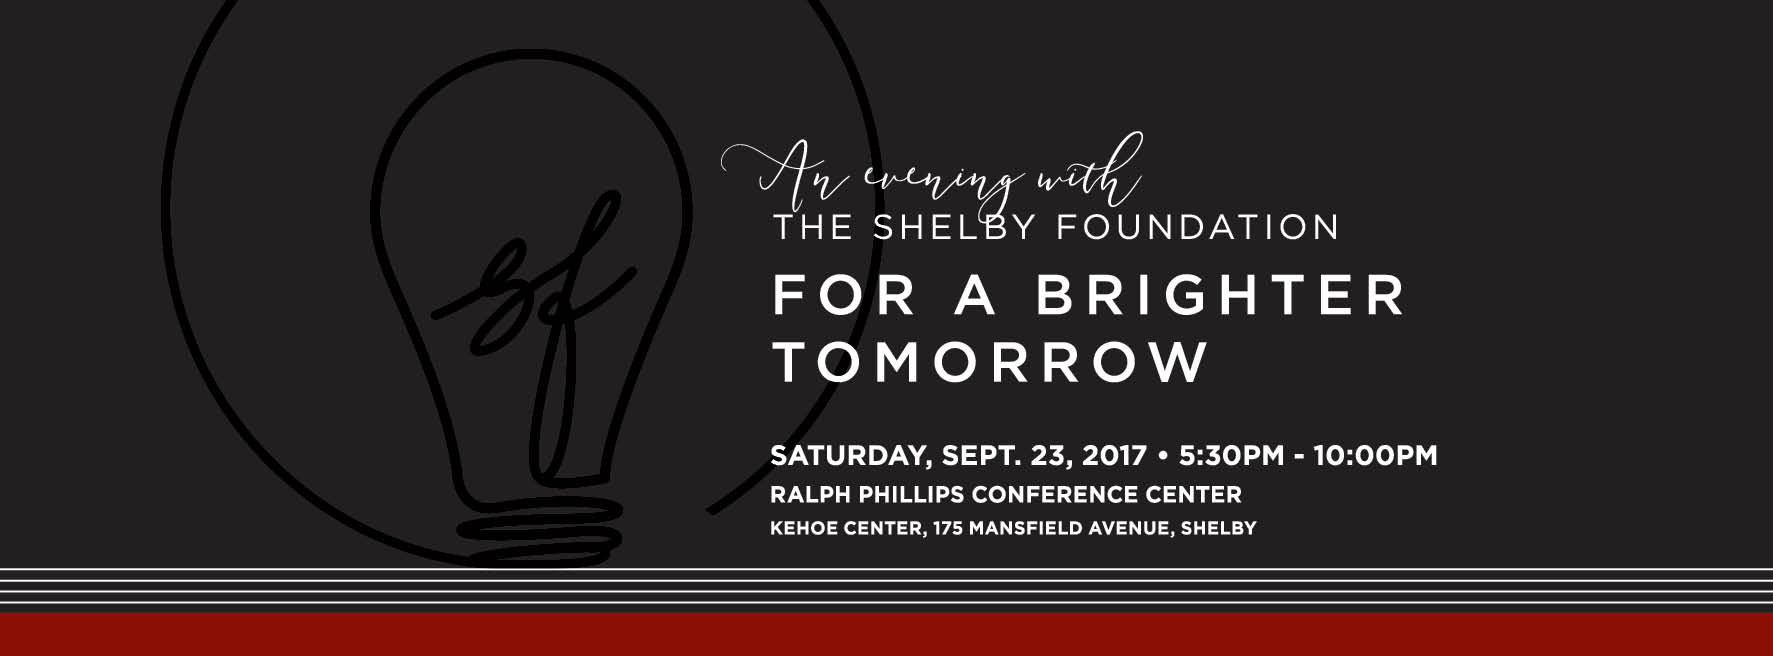 An Evening with The Shelby Foundation For a Brighter Tomorrow Fundraiser